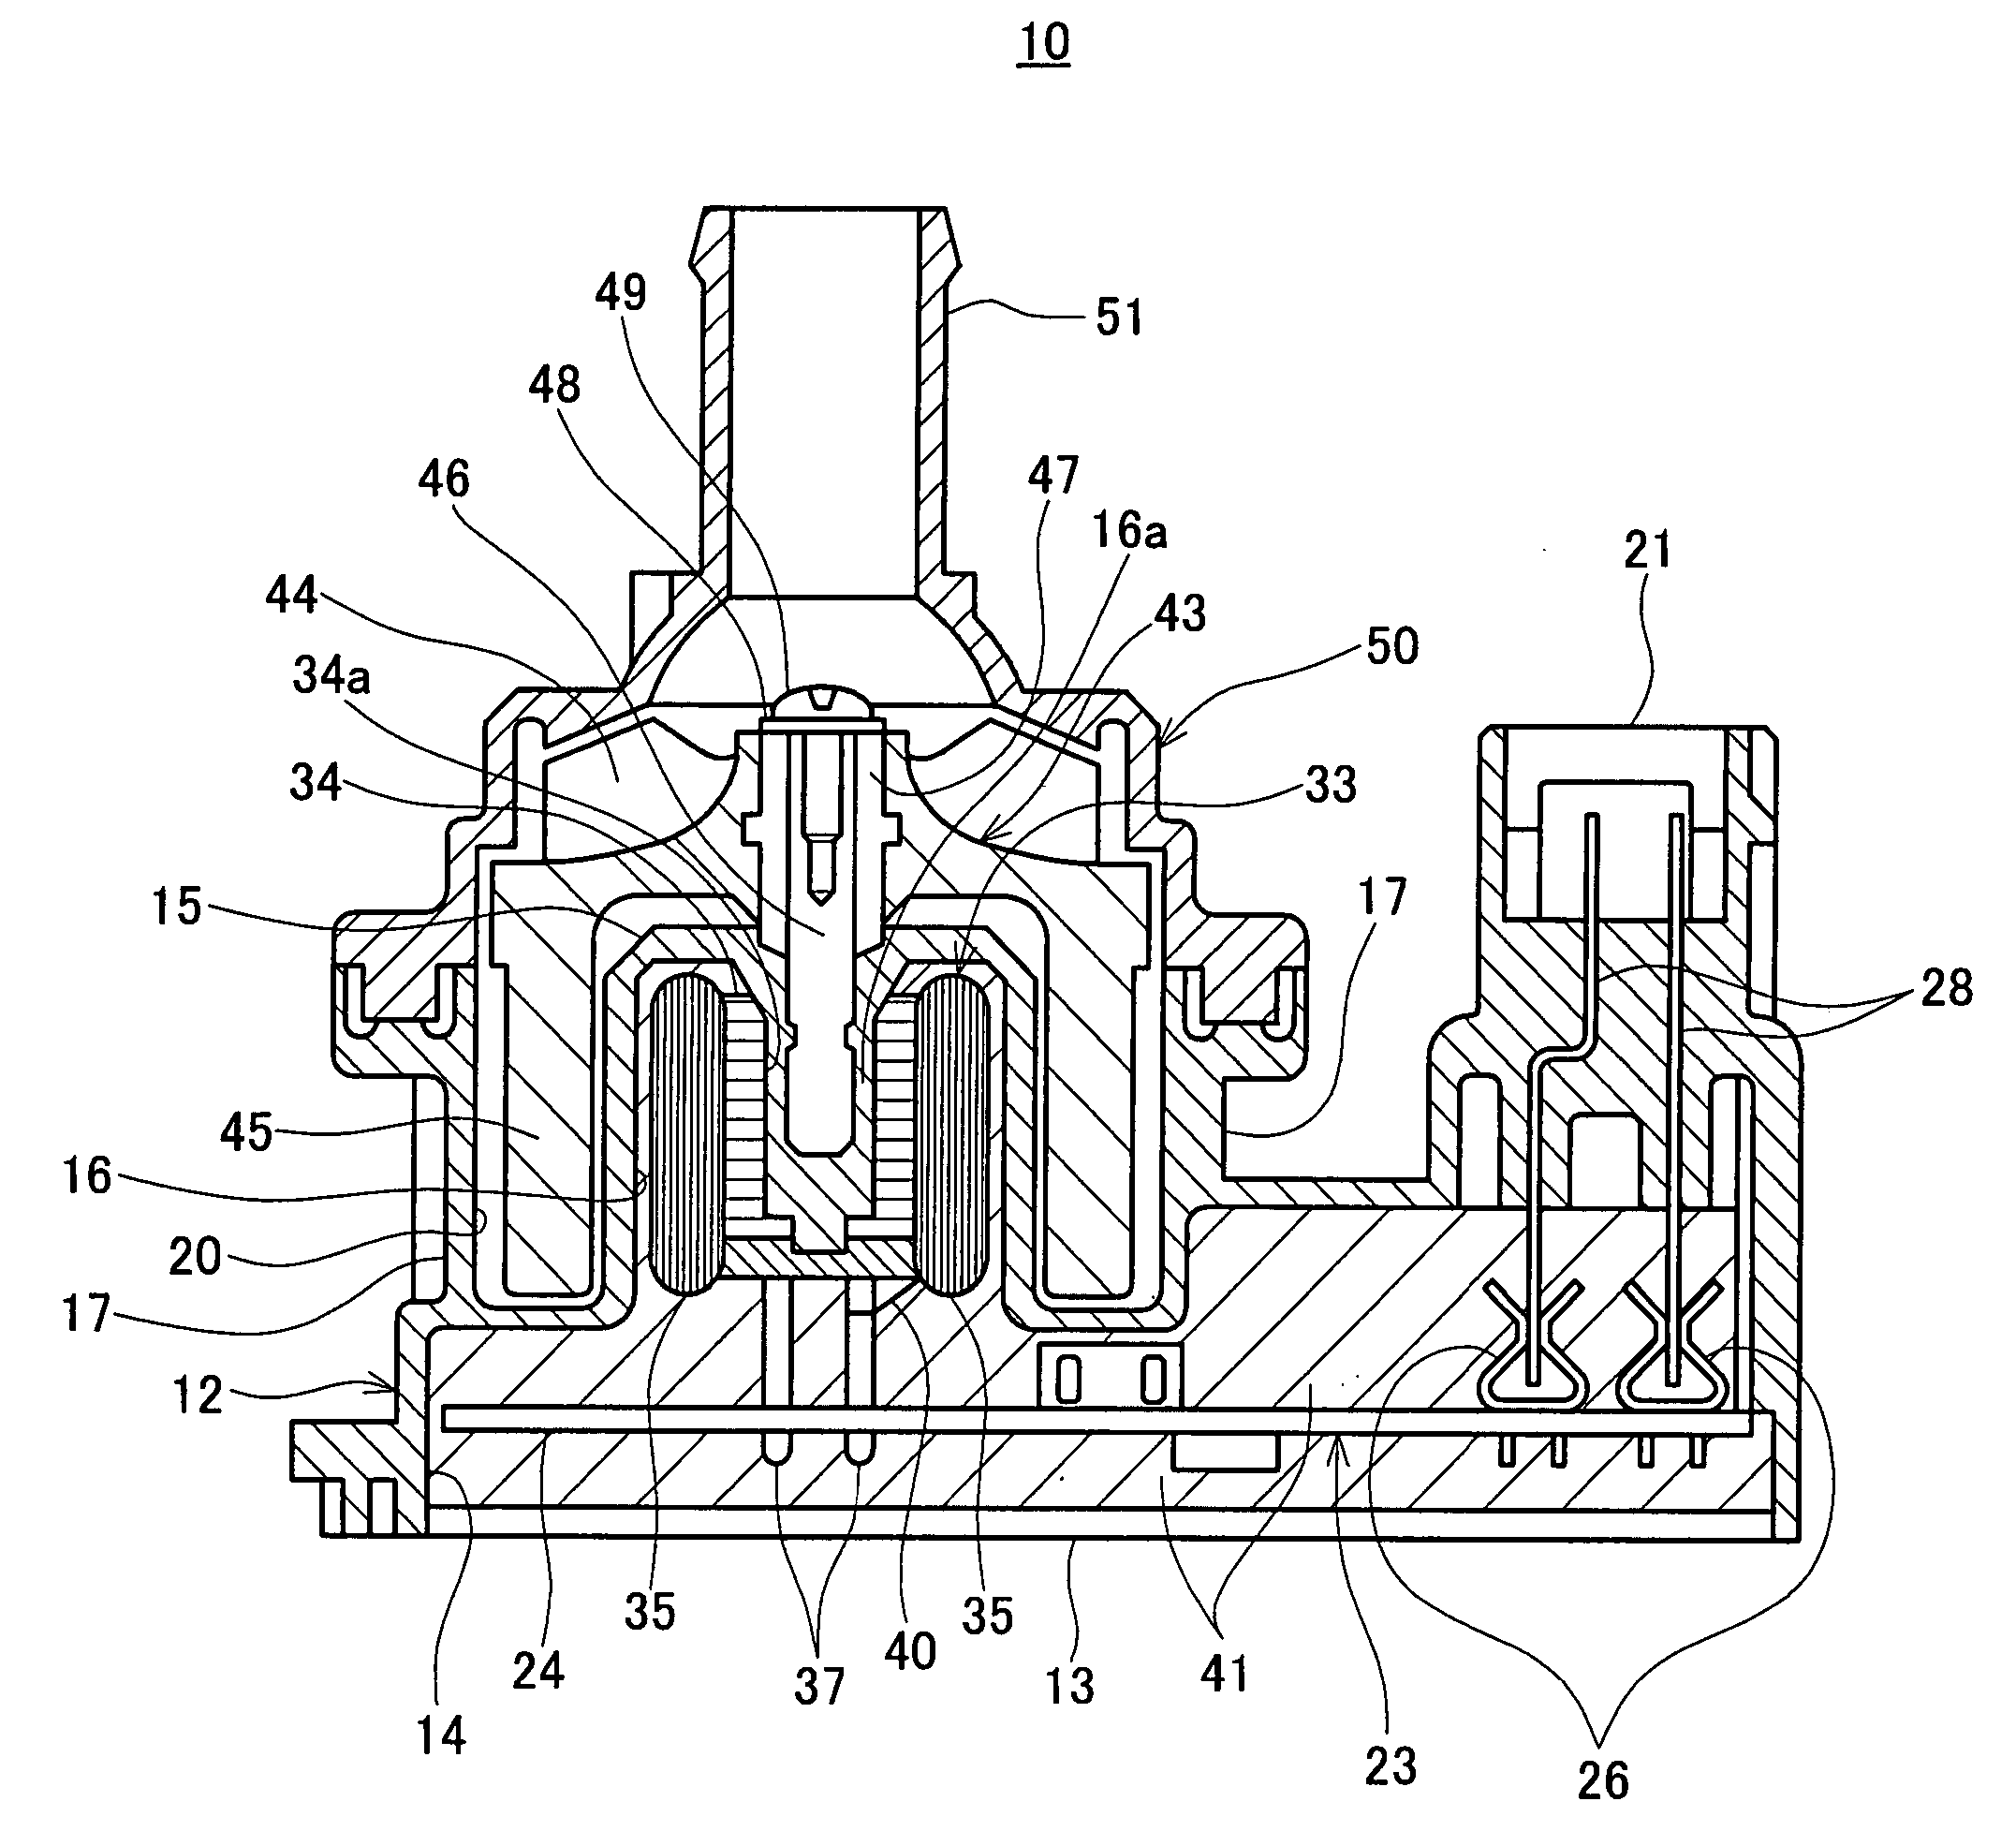 Electronic control unit and electric pump